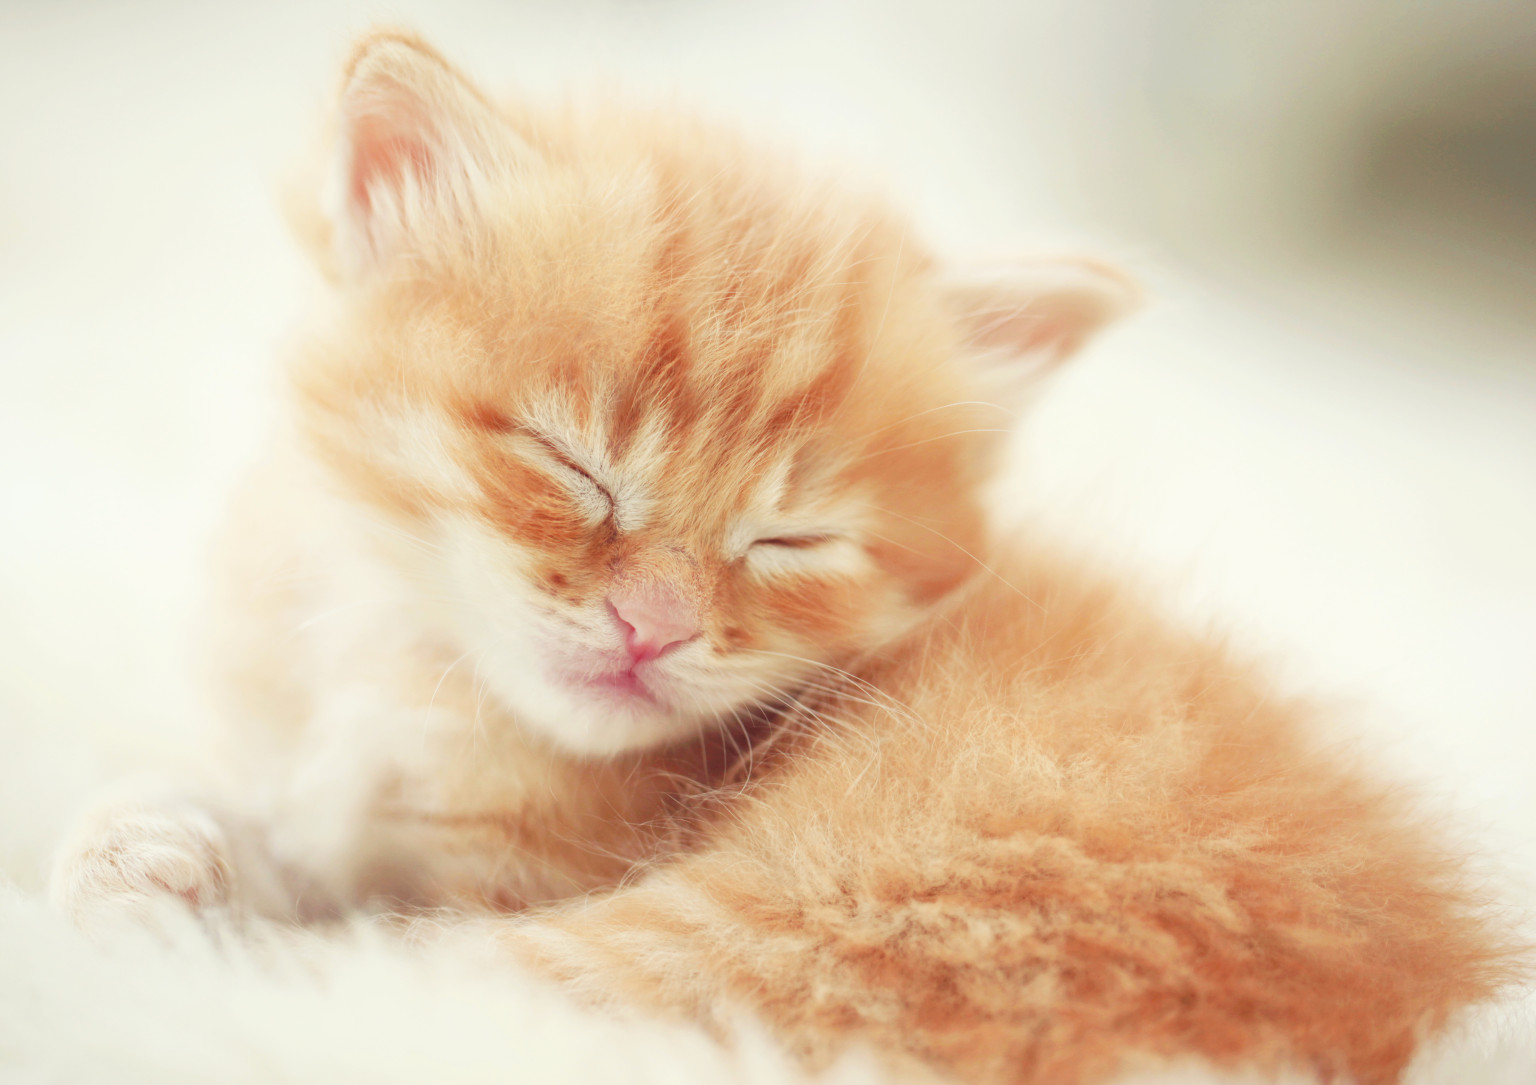 Kitten Nearly Dies On Vegan Diet, Gets Healed With Meat | HuffPost